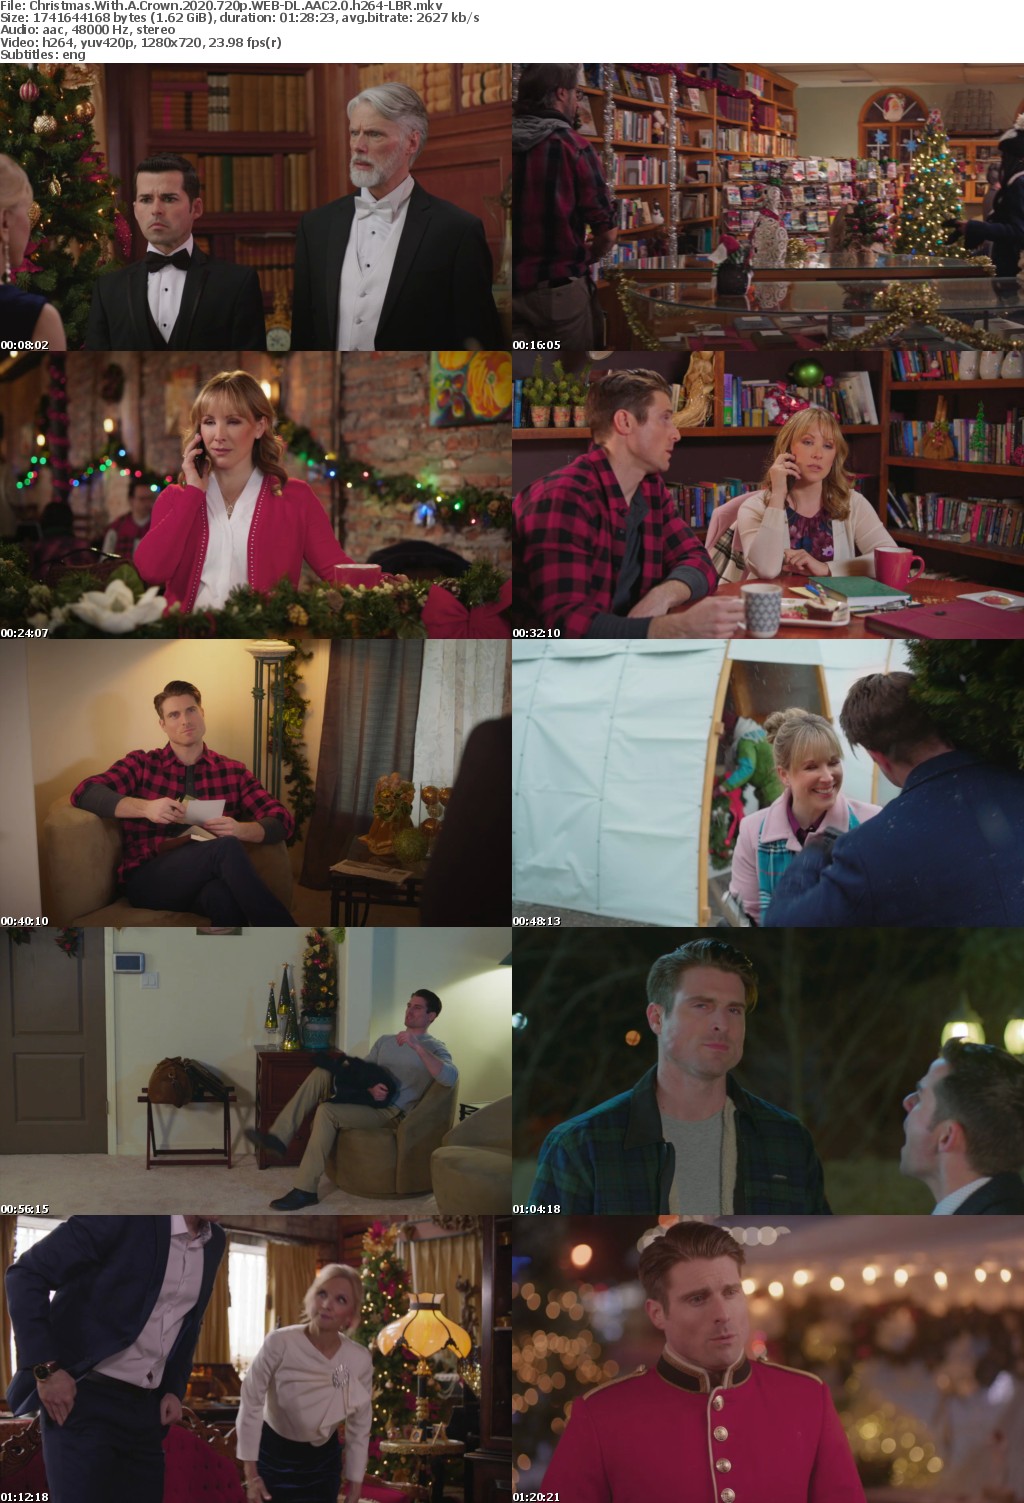 Christmas With A Crown 2020 720p WEB-DL AAC2 0 h264-LBR